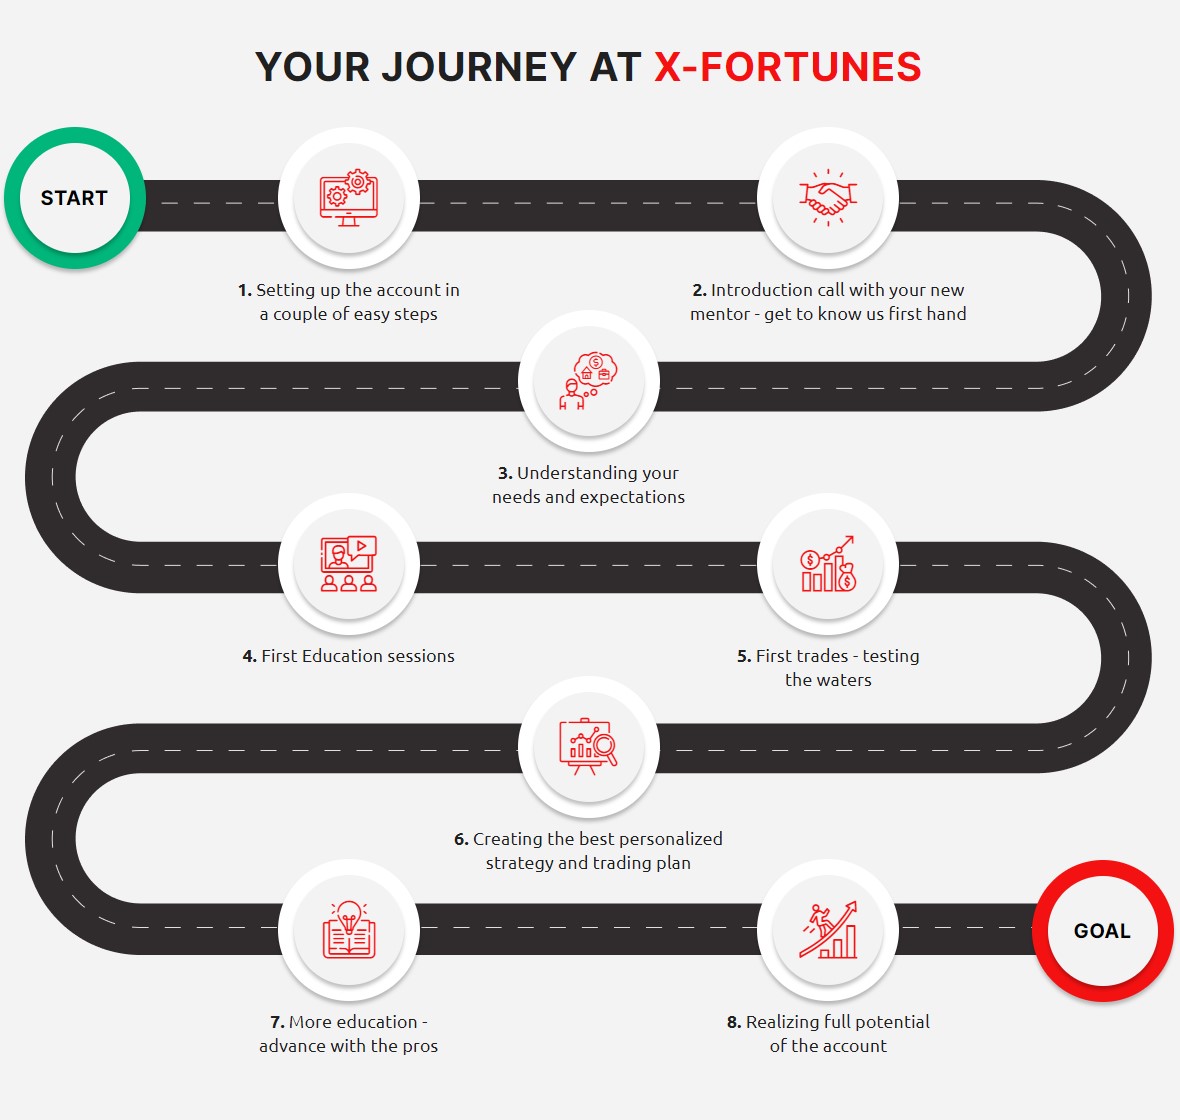 Your Journey at X-Fortunes